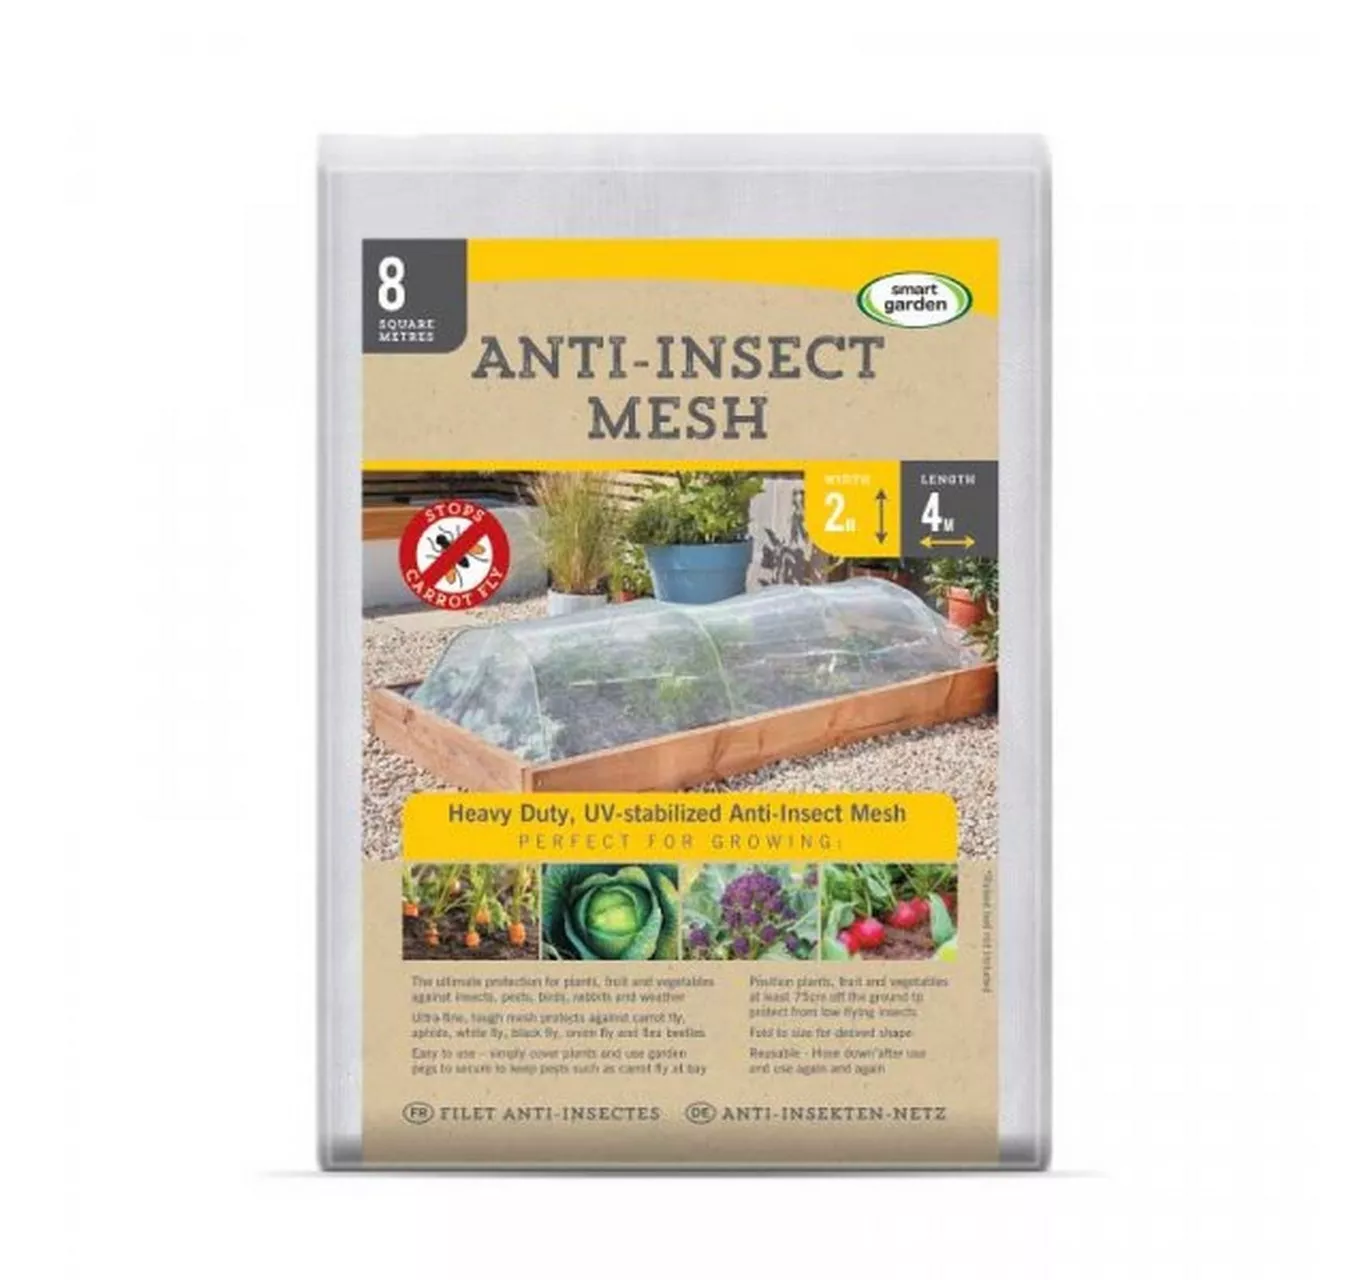 Anti-Insect Mesh 2m x 4m